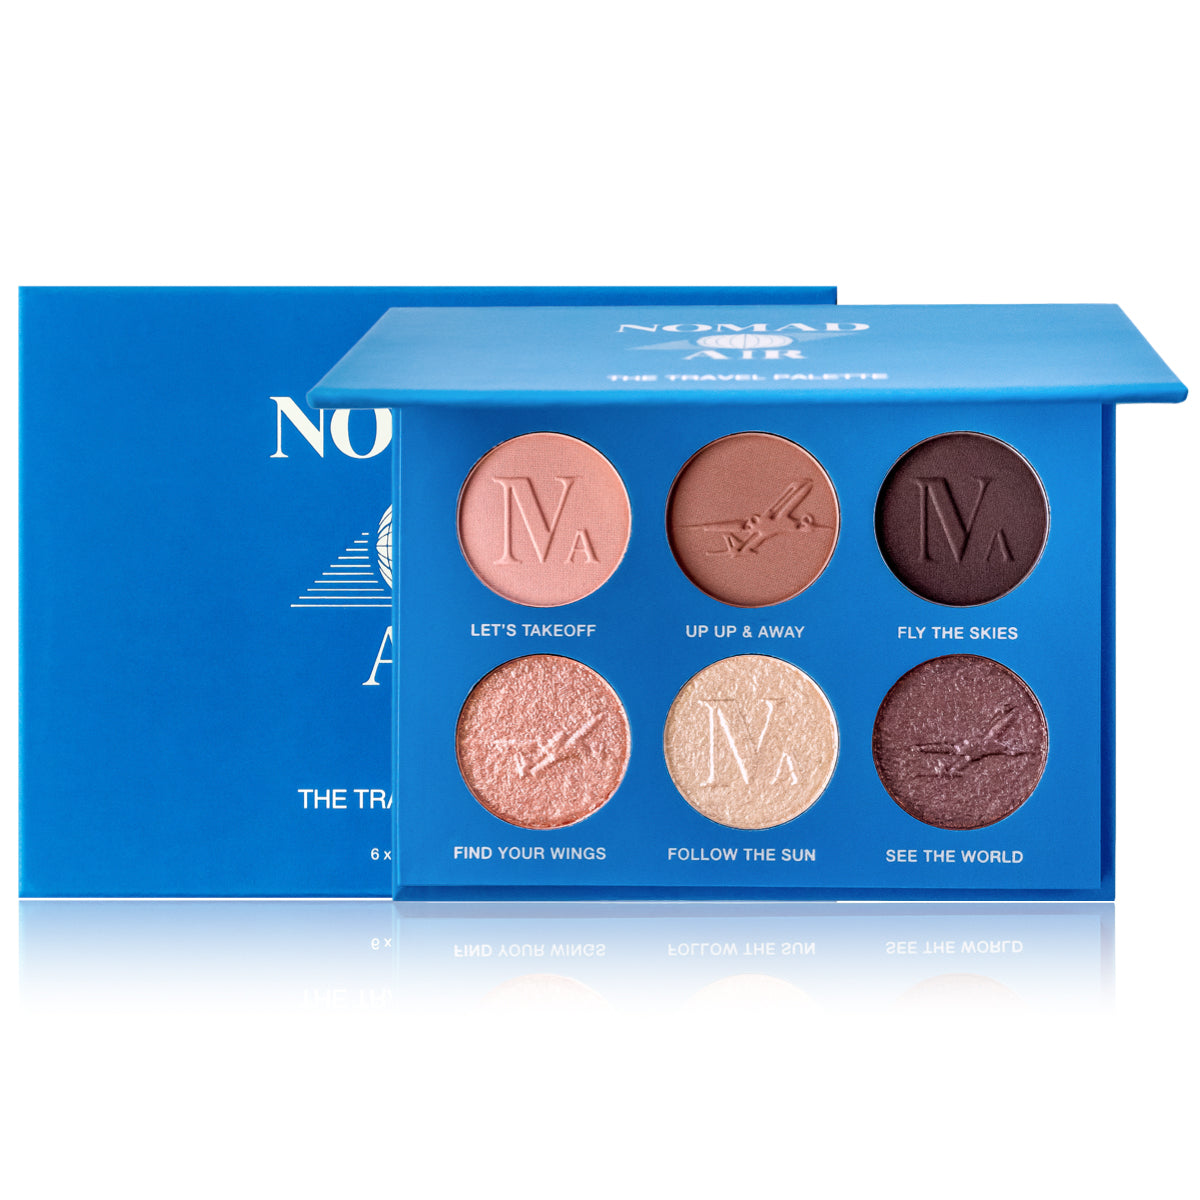 NOMAD Air - The Travel Eyeshadow Palette